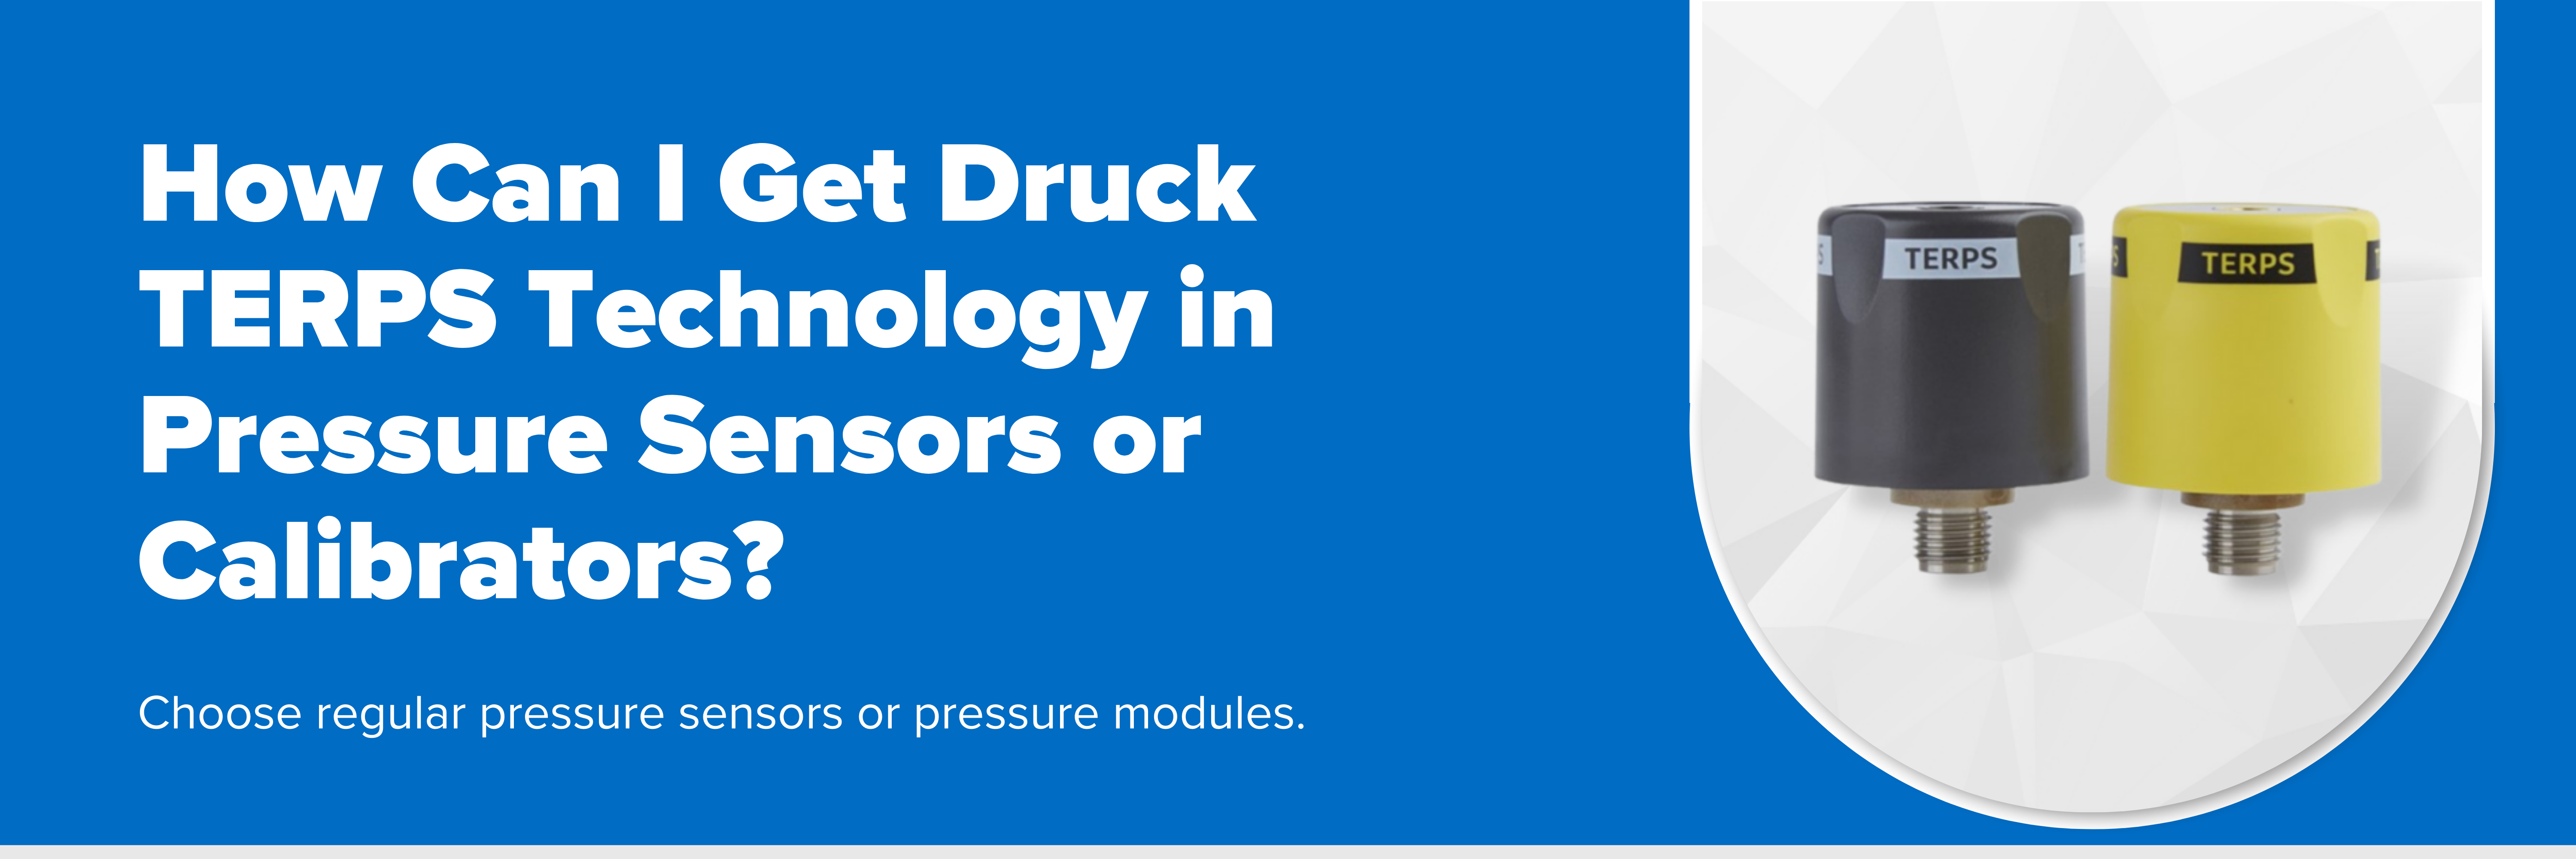 Header image with text "How Can I Get Druck TERPS Technology in Pressure Sensors or Calibrators?